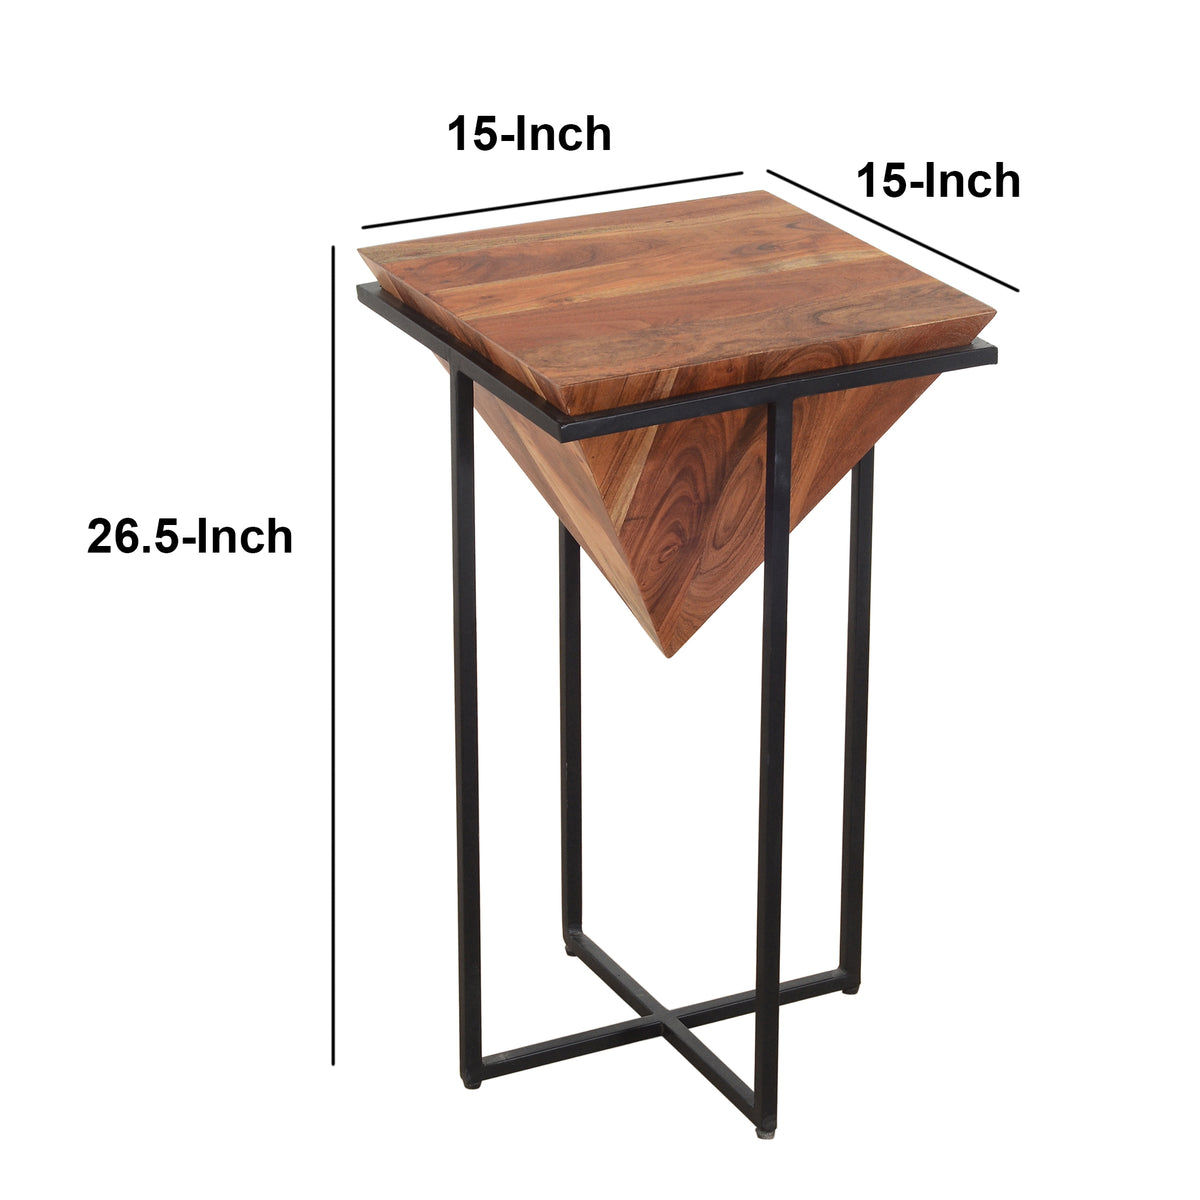 Ida 26 Inch Pyramid Shape Wooden Side Table With Cross Metal Base, Brown and Black - UPT-199996